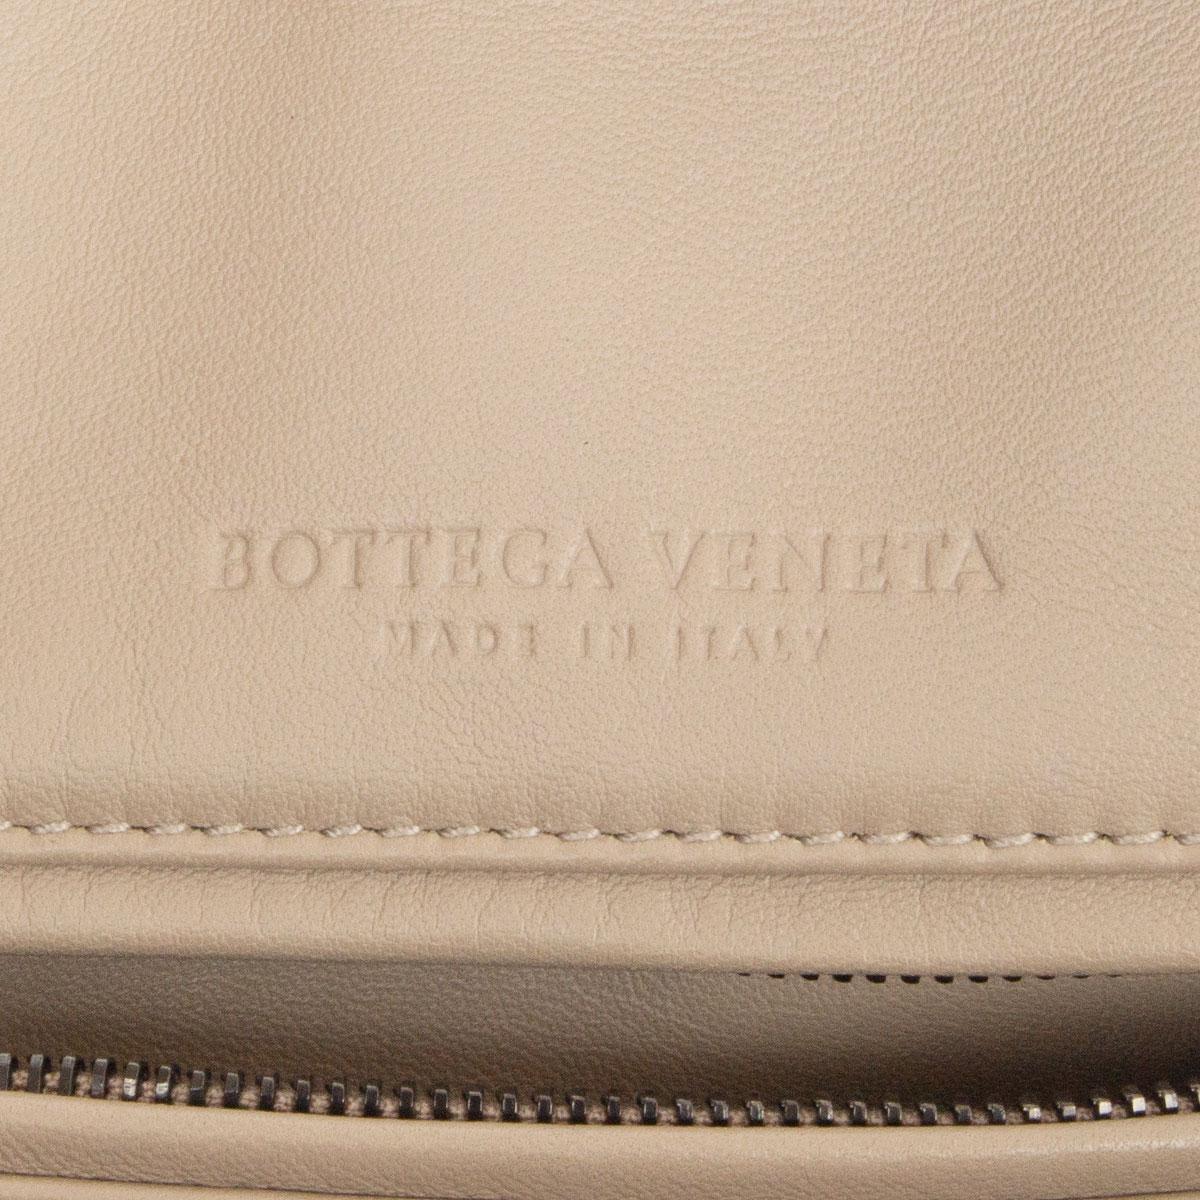 BOTTEGA VENETA light taupe suede BOWLING Bag In Excellent Condition For Sale In Zürich, CH